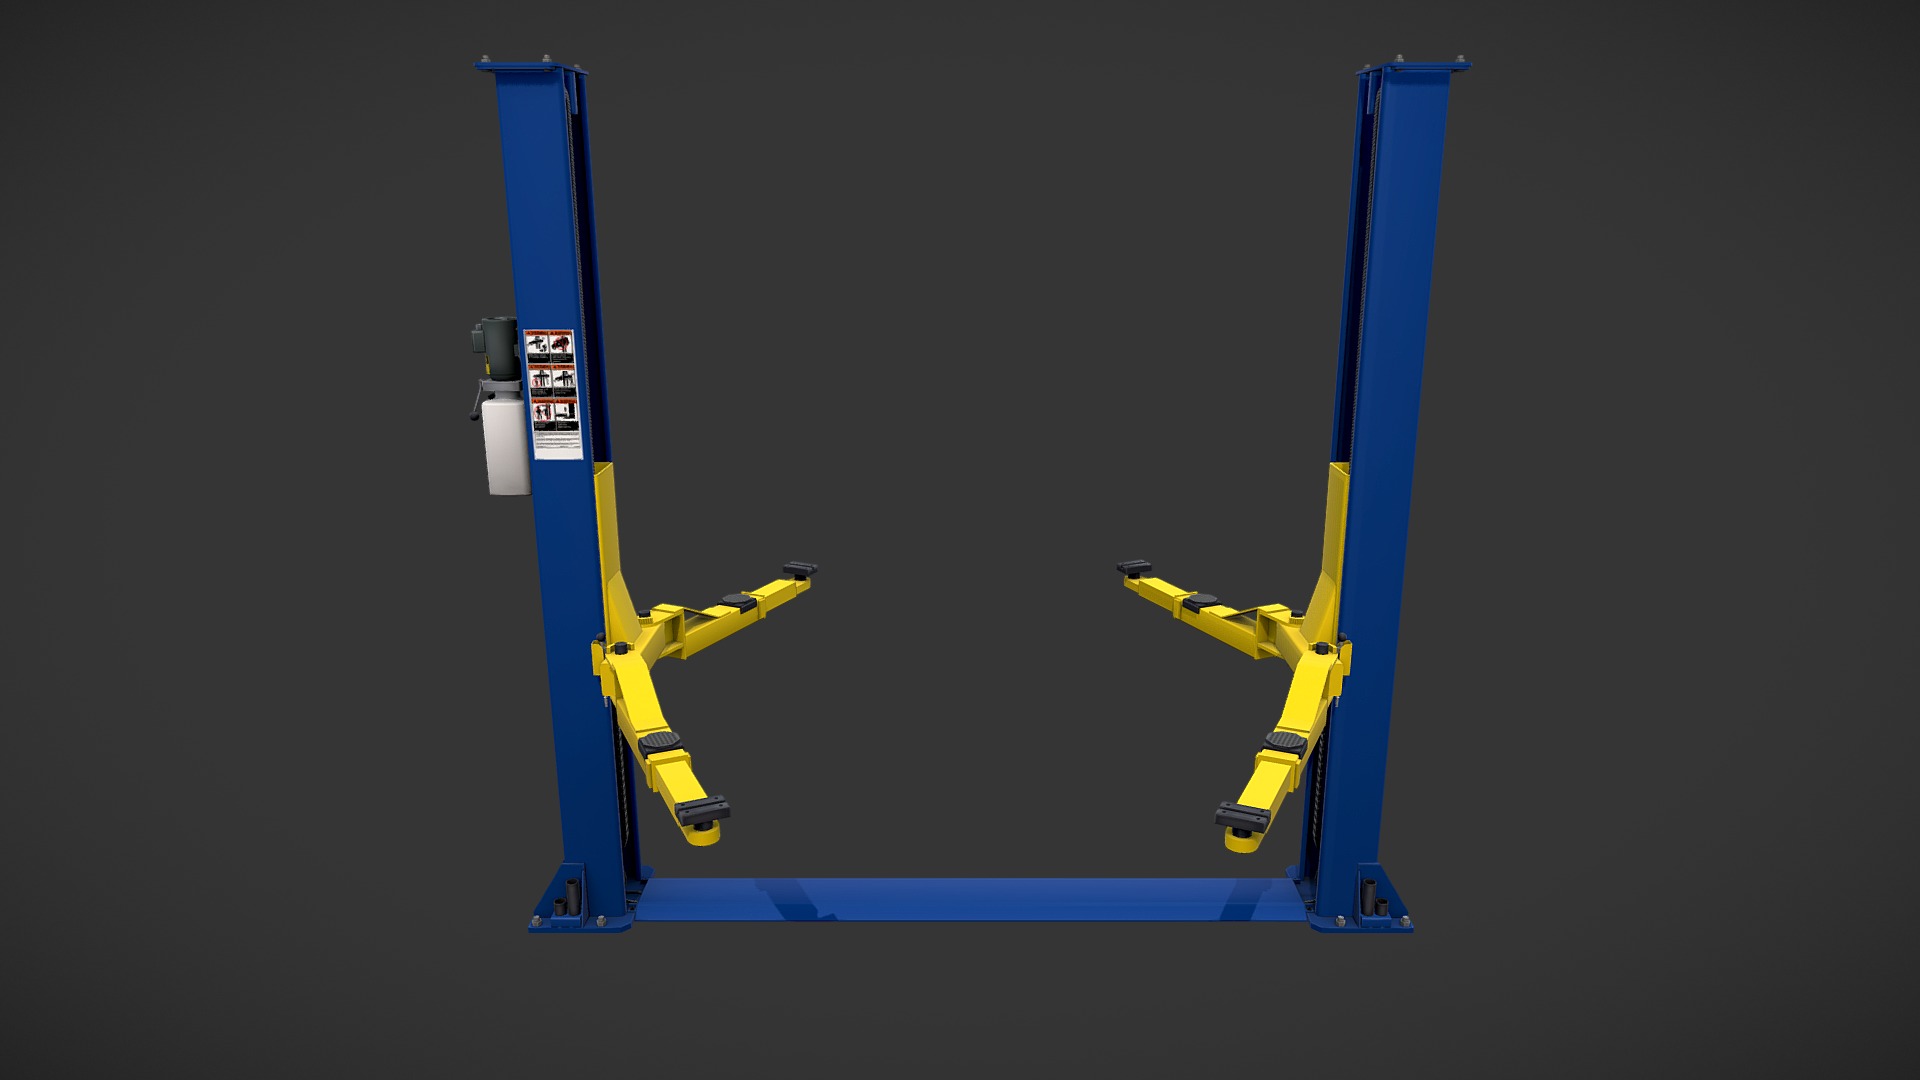 3D model Car Lift - This is a 3D model of the Car Lift. The 3D model is about a few blue and yellow toy airplanes.